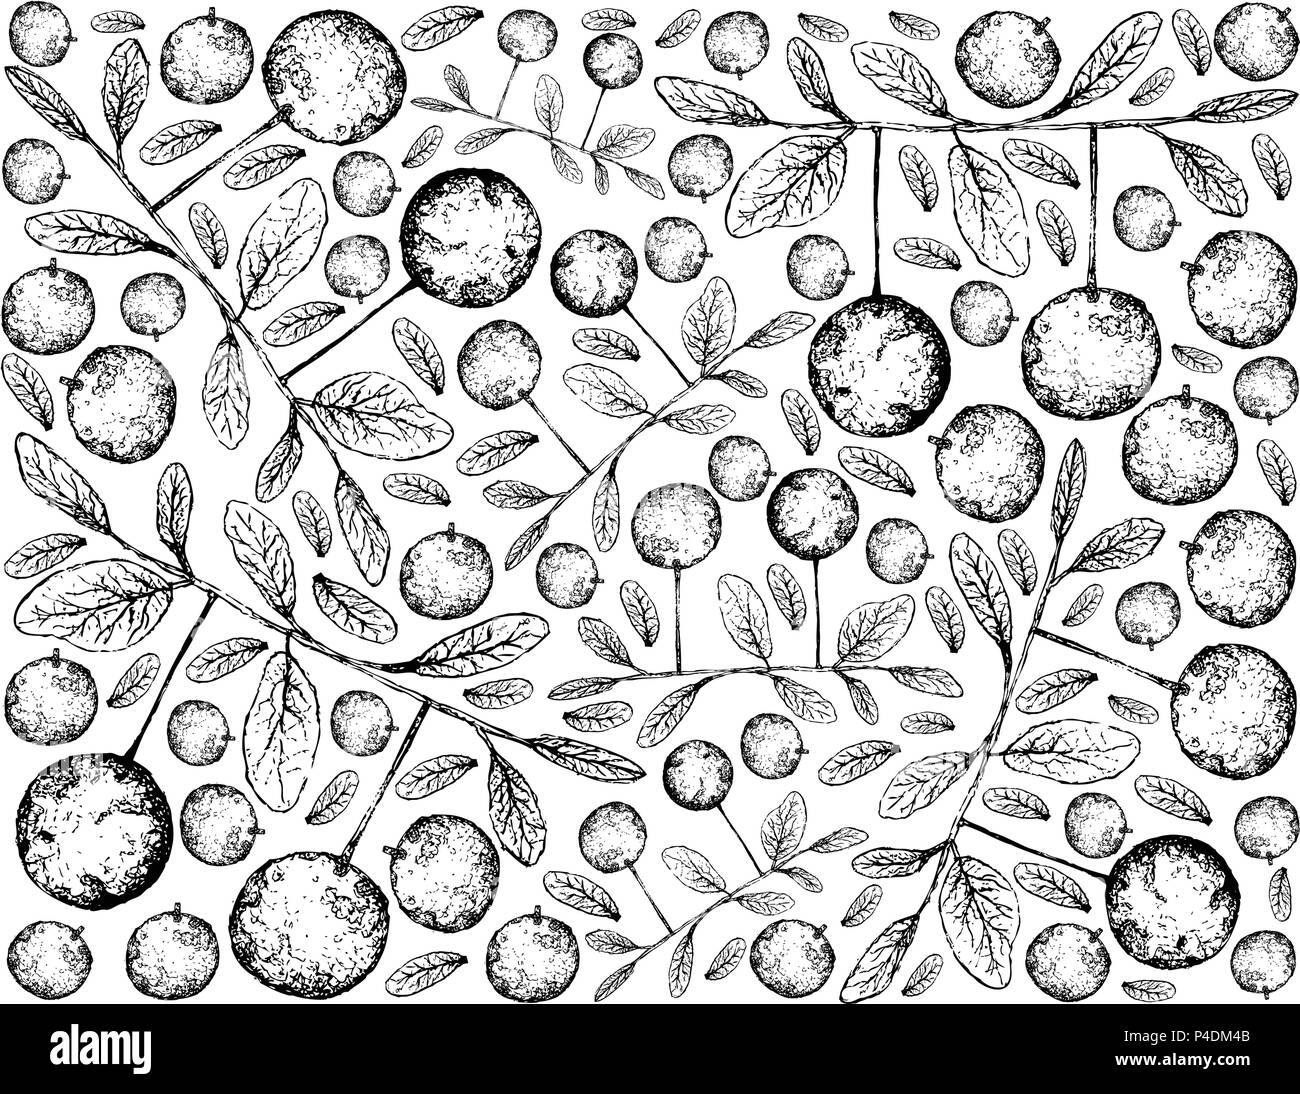 Tropical Fruit, Illustration Wallpaper of Hand Drawn Sketch Ripe and Sweet Diospyros Filipendula Fruits Isolated on White Background. Stock Vector